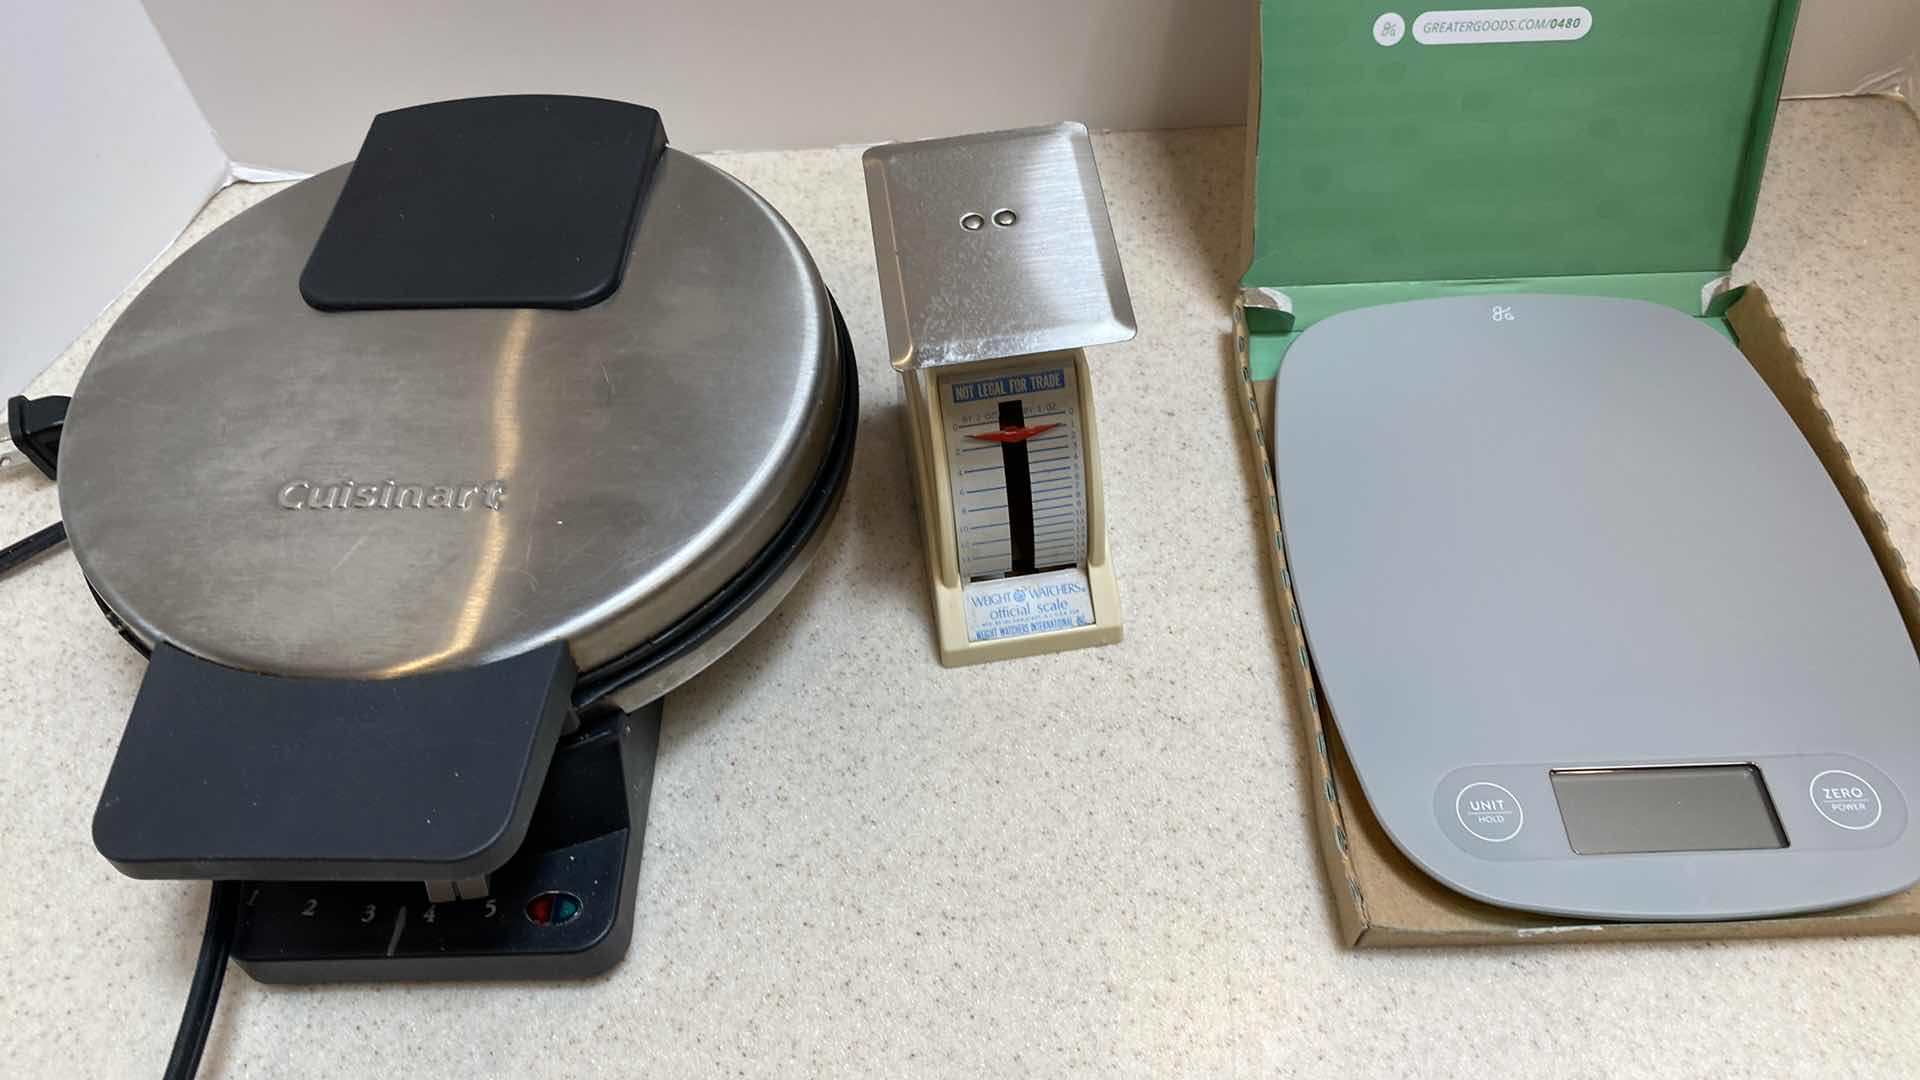 Photo 2 of CUISINART WAFFLE MAKER AND KITCHEN SCALES